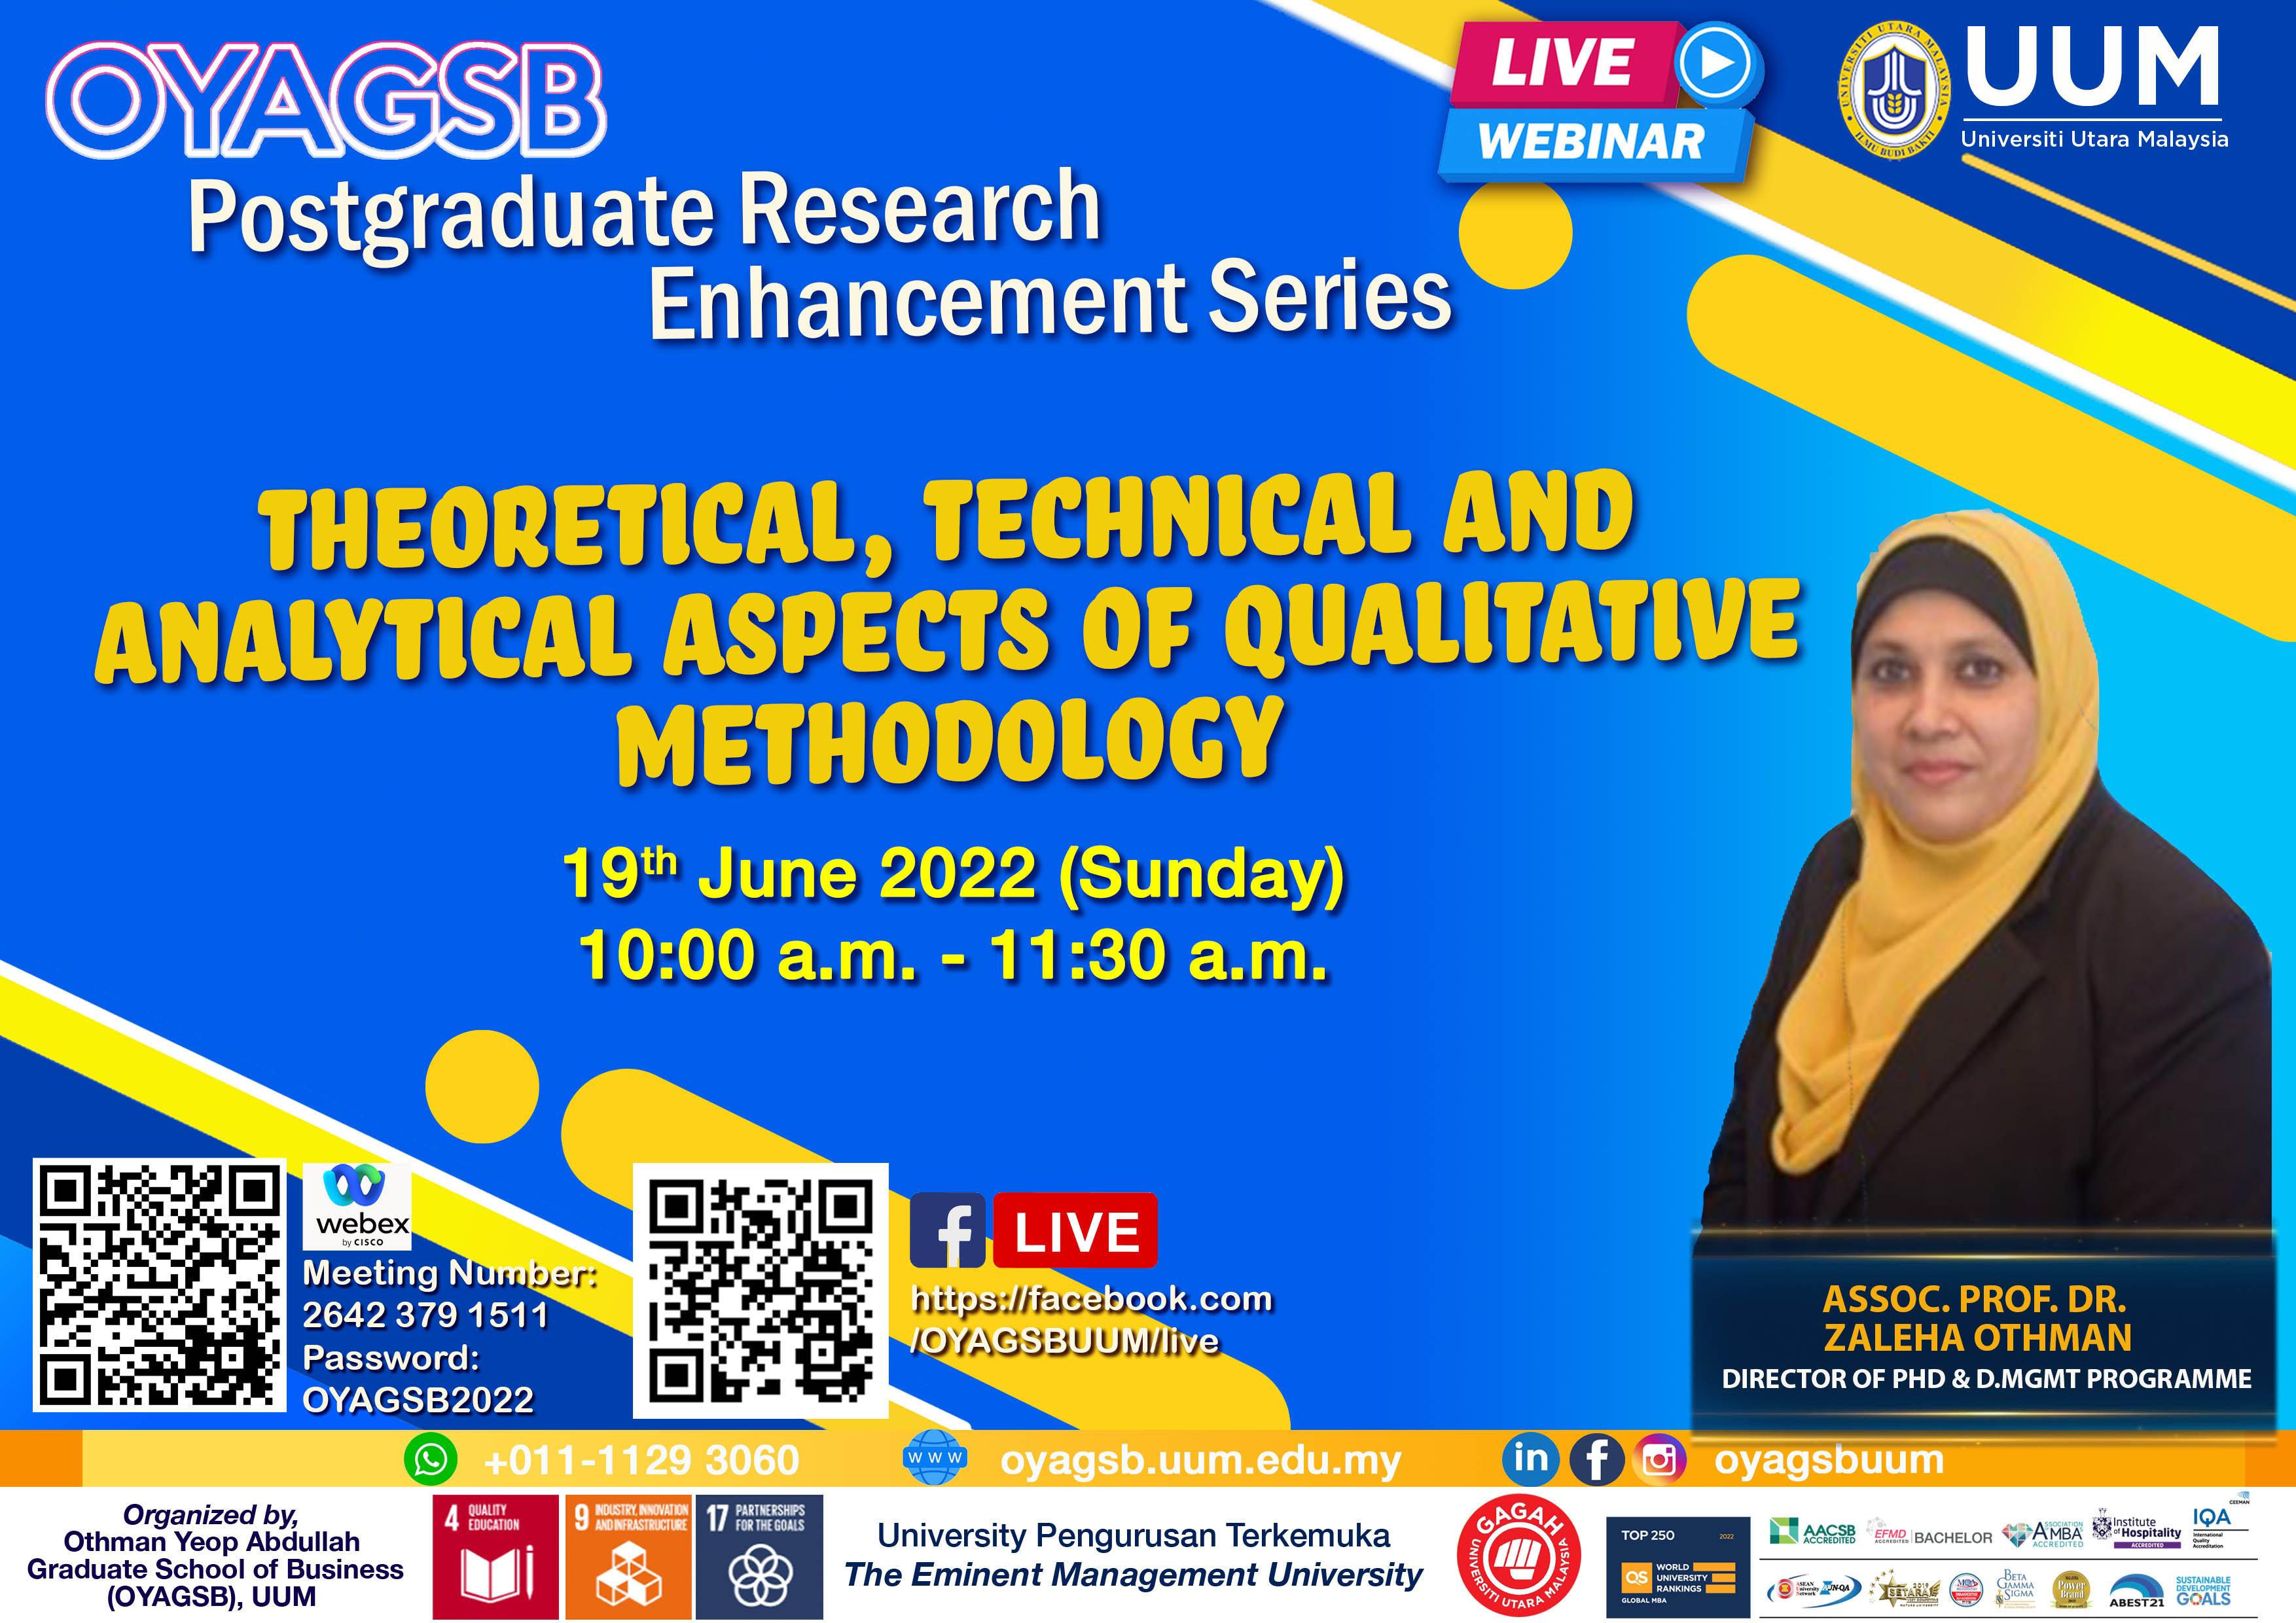 Postgraduate Research Enhancement Series: Theoretical, Technical and Analytical Aspects of Qualitative Methodology